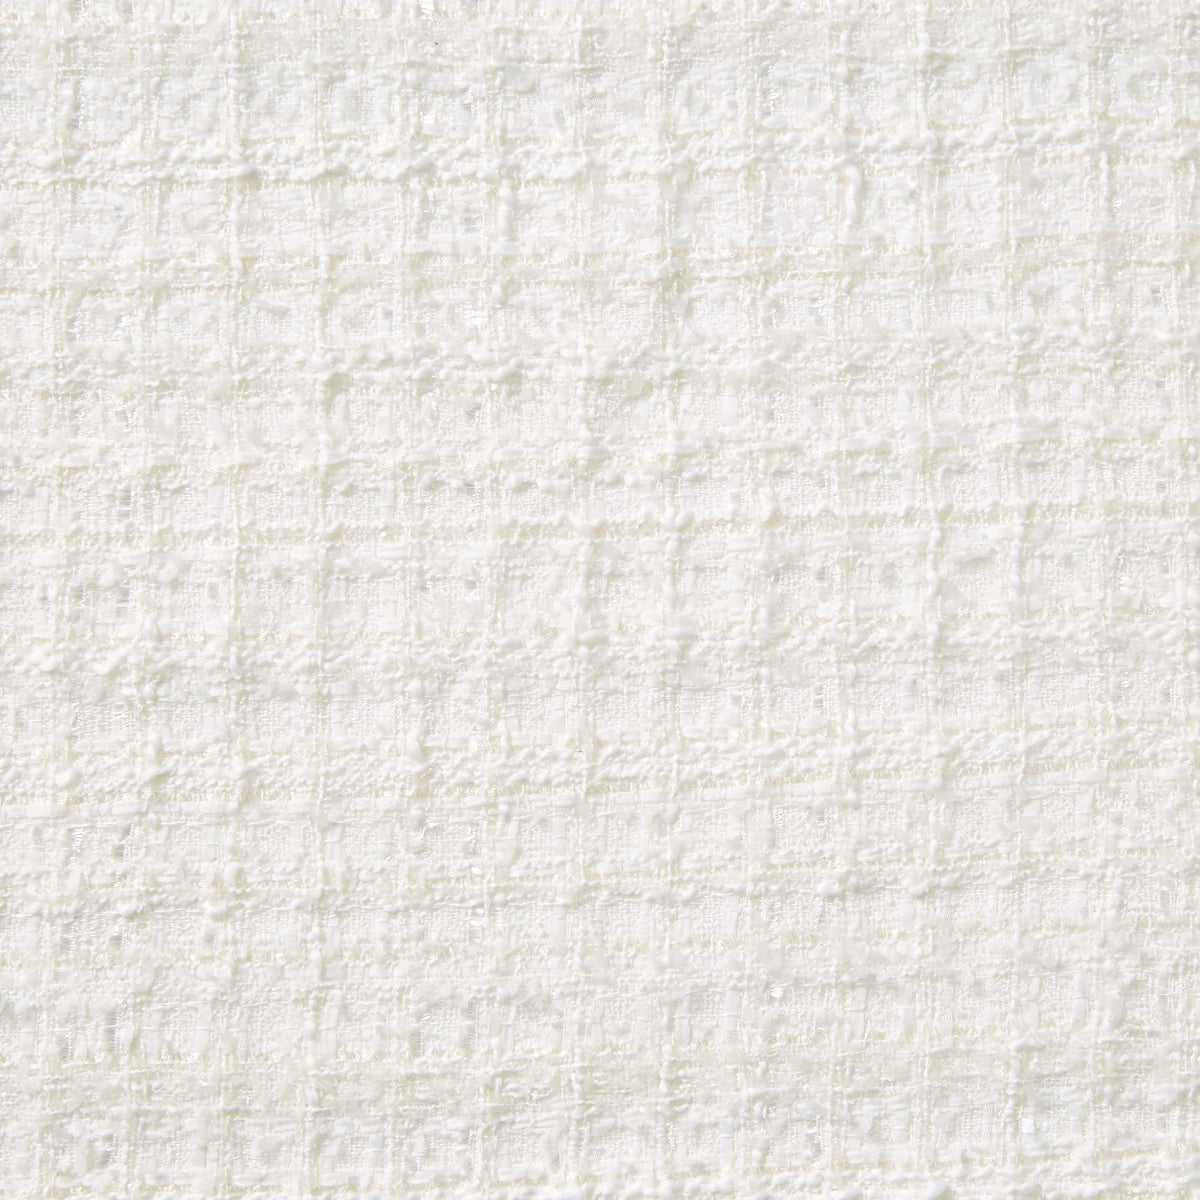 Chanel tweed fabric supplier with the best quality and price